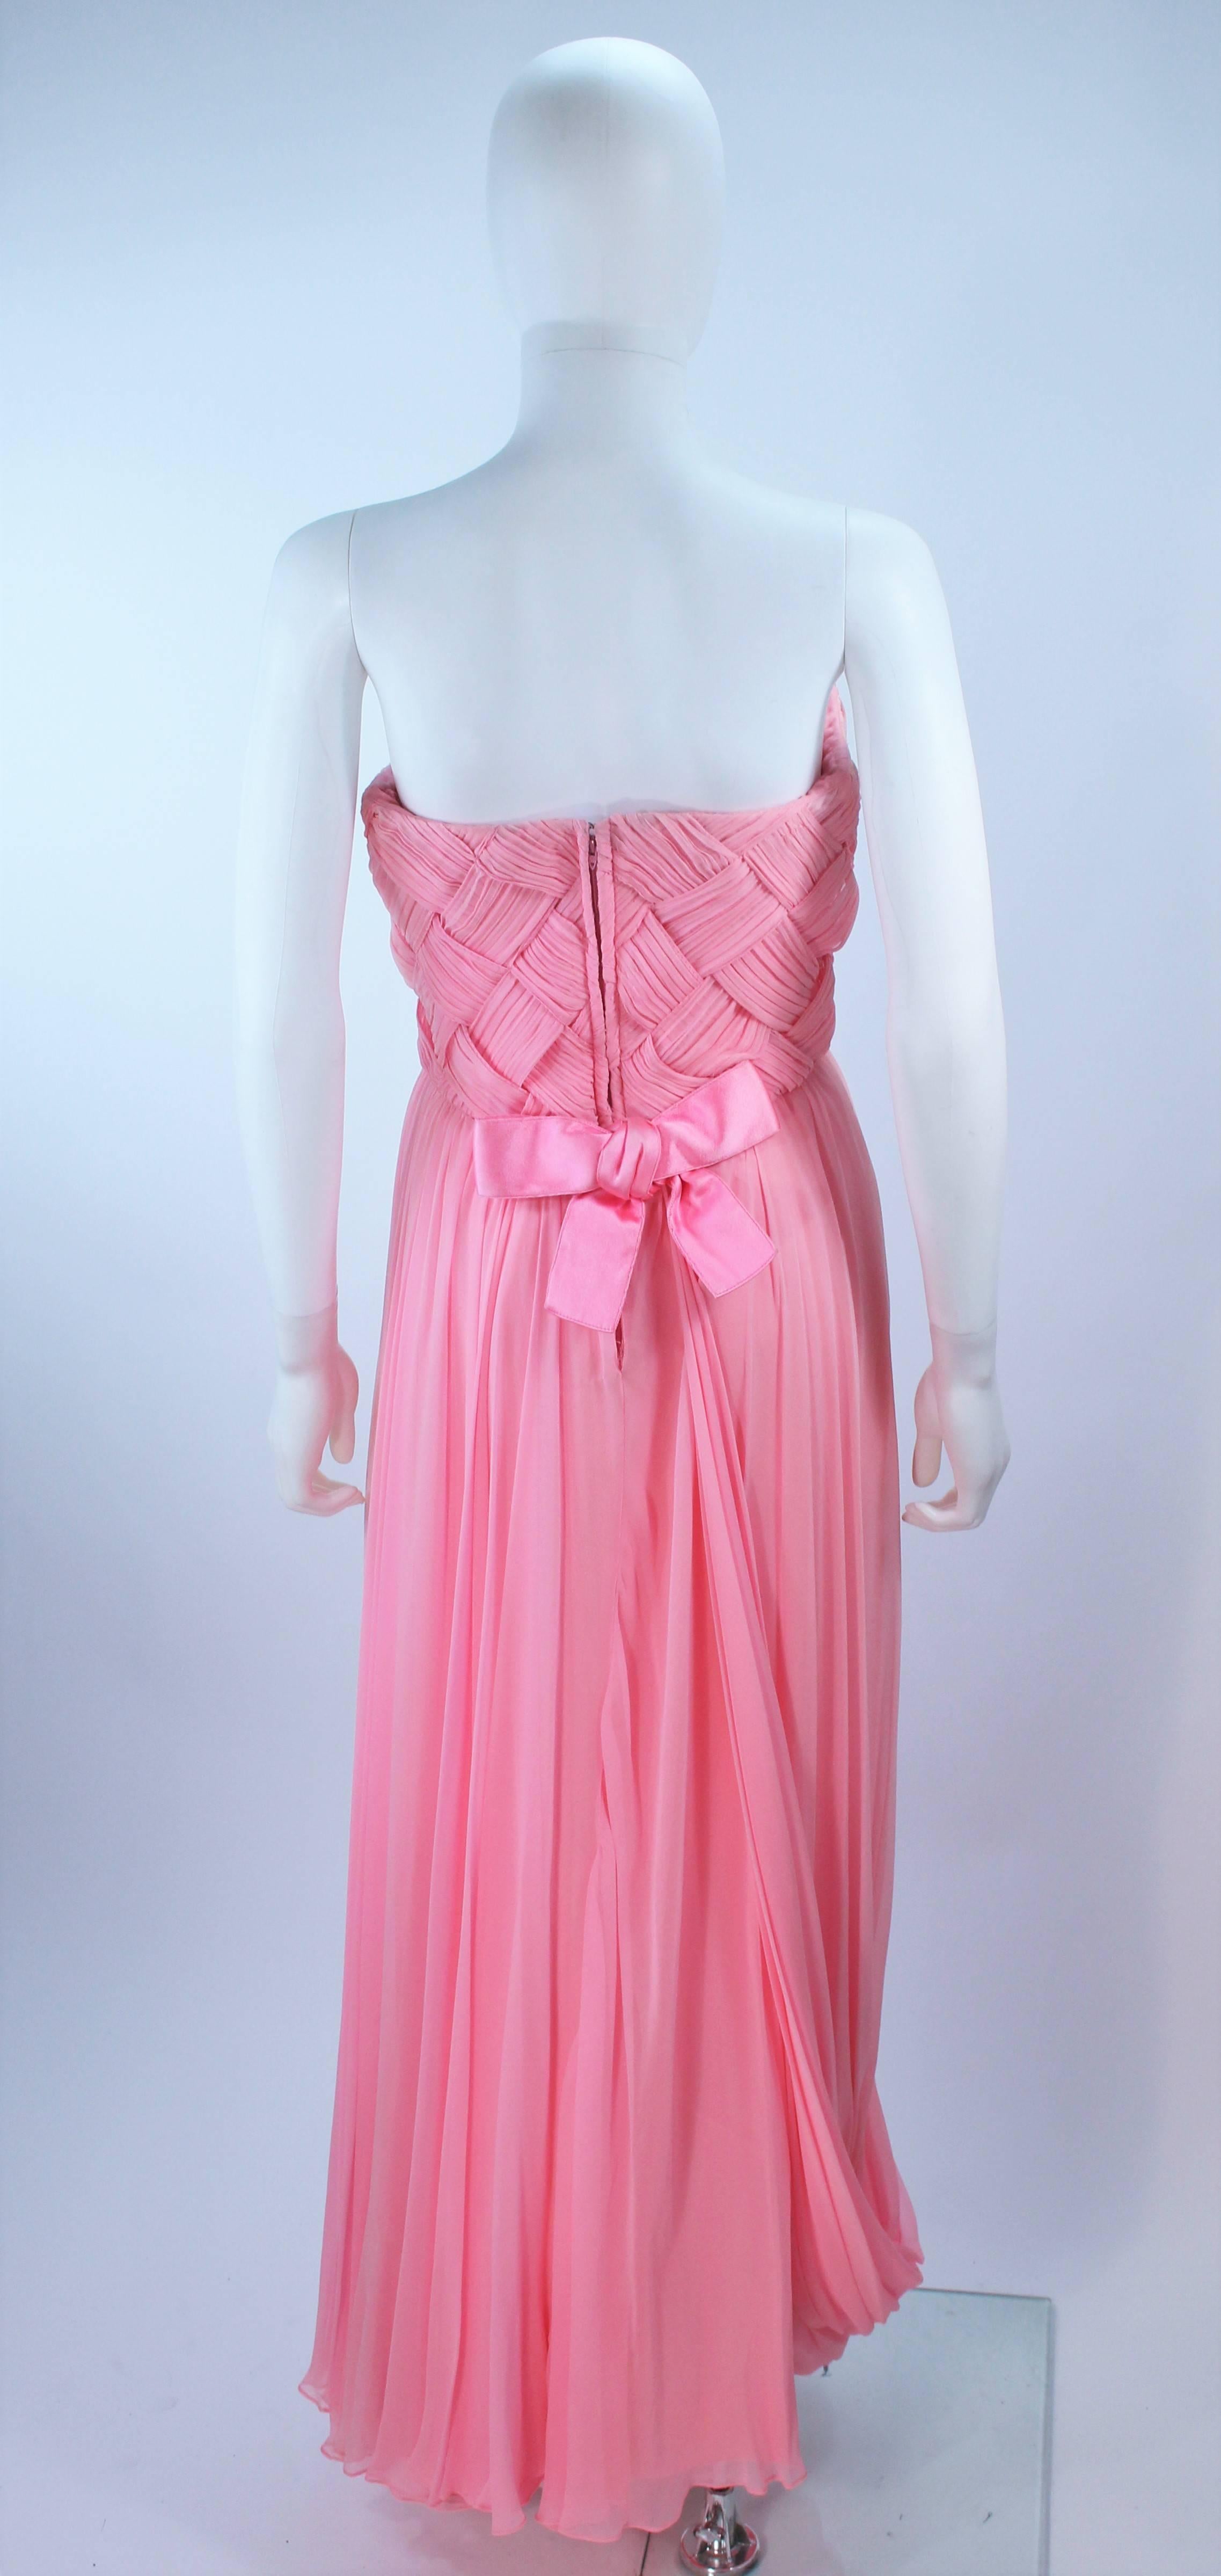 SCAASI Pink Draped SILK Chiffon Gown with Criss-Cross Bodice Size 4-6 For Sale 2